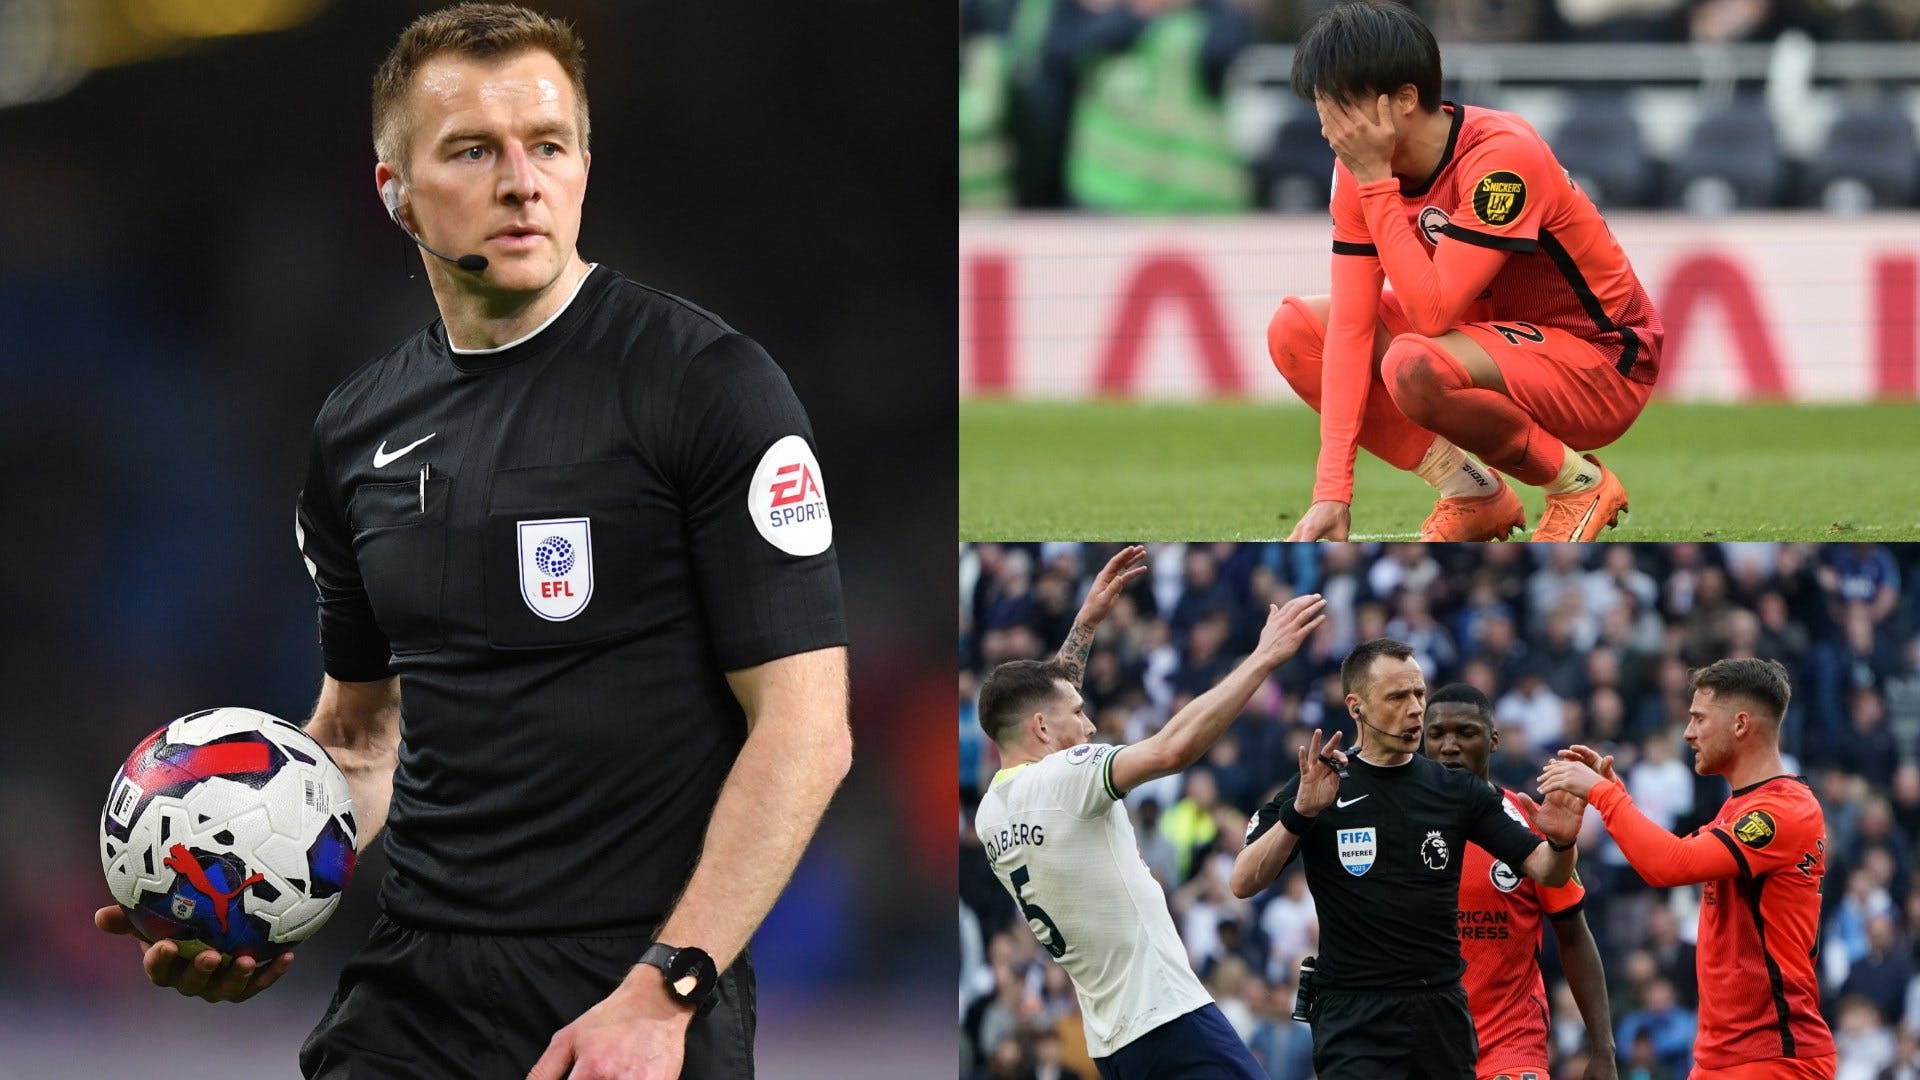 Another Premier League referee punished! Michael Salisbury suspended for controversial penalty decision in Tottenham vs Brighton match Goal US